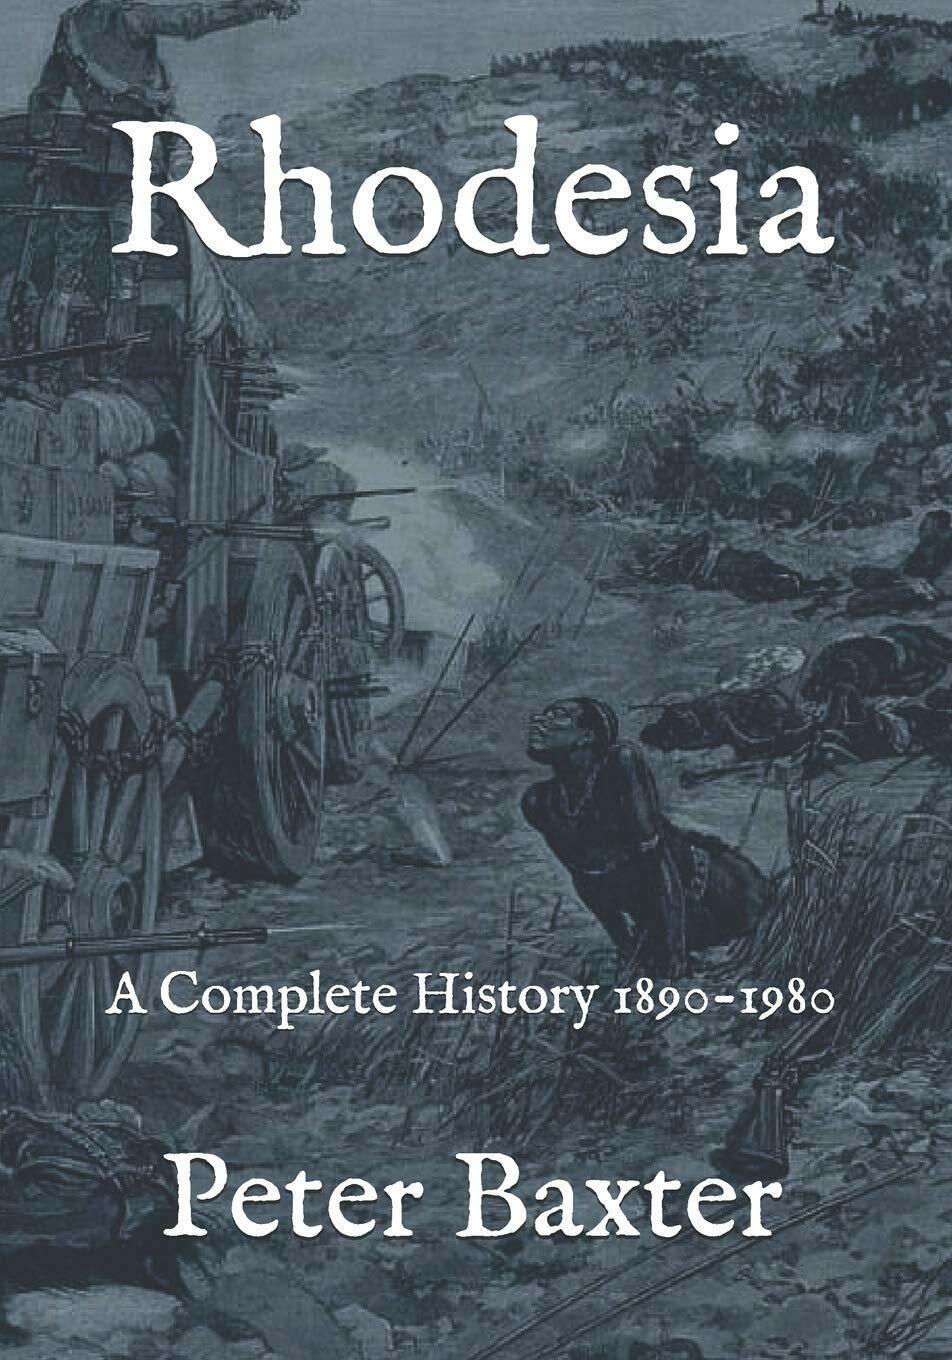 Rhodesia A Complete History 1890-1980 di Peter Baxter,  2018,  Independently Pub libro usato